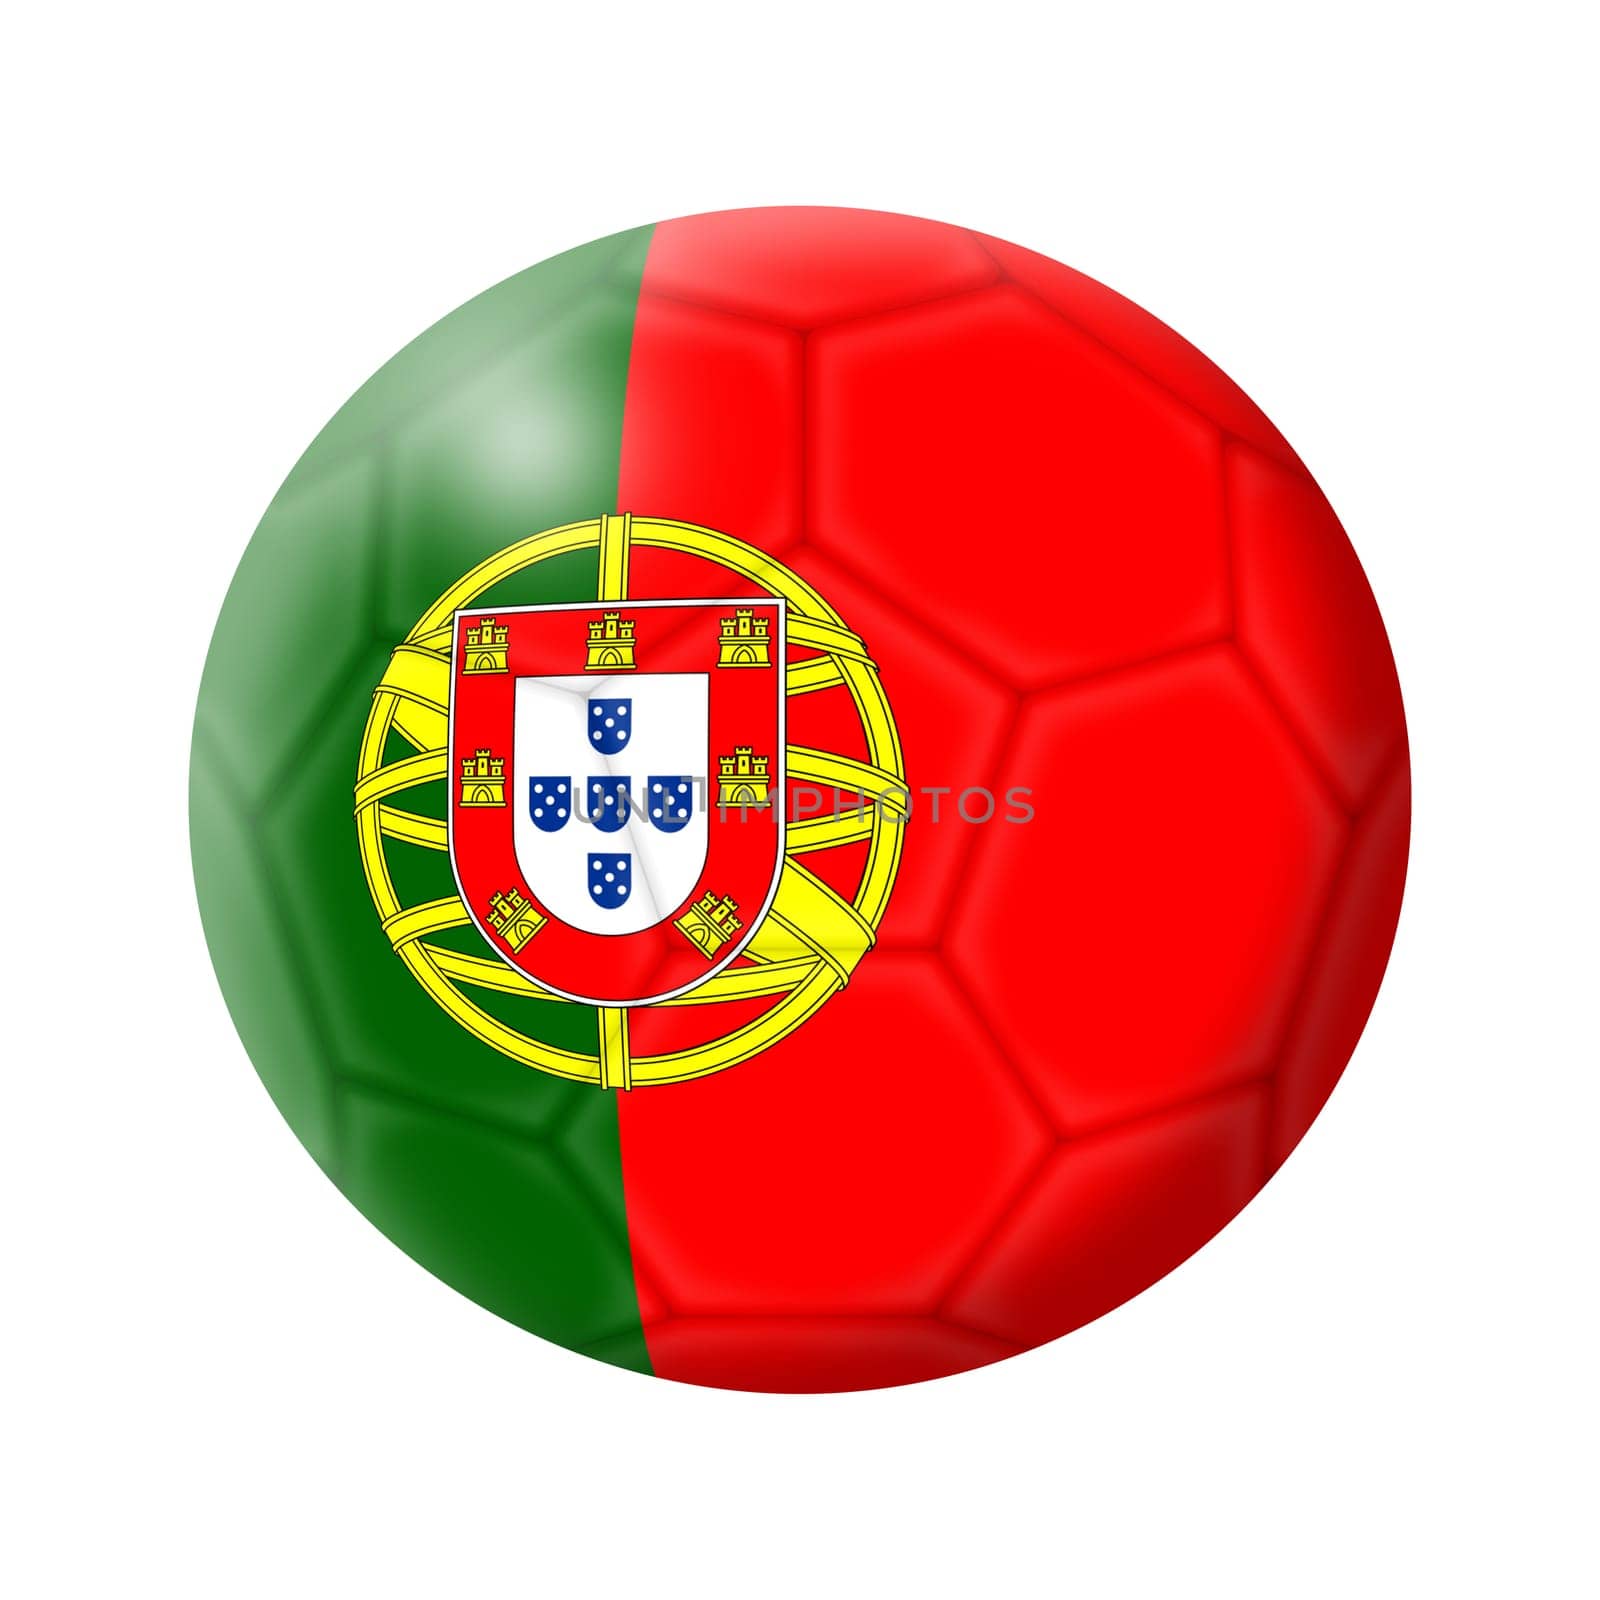 Portugal soccer ball football with clipping path by VivacityImages